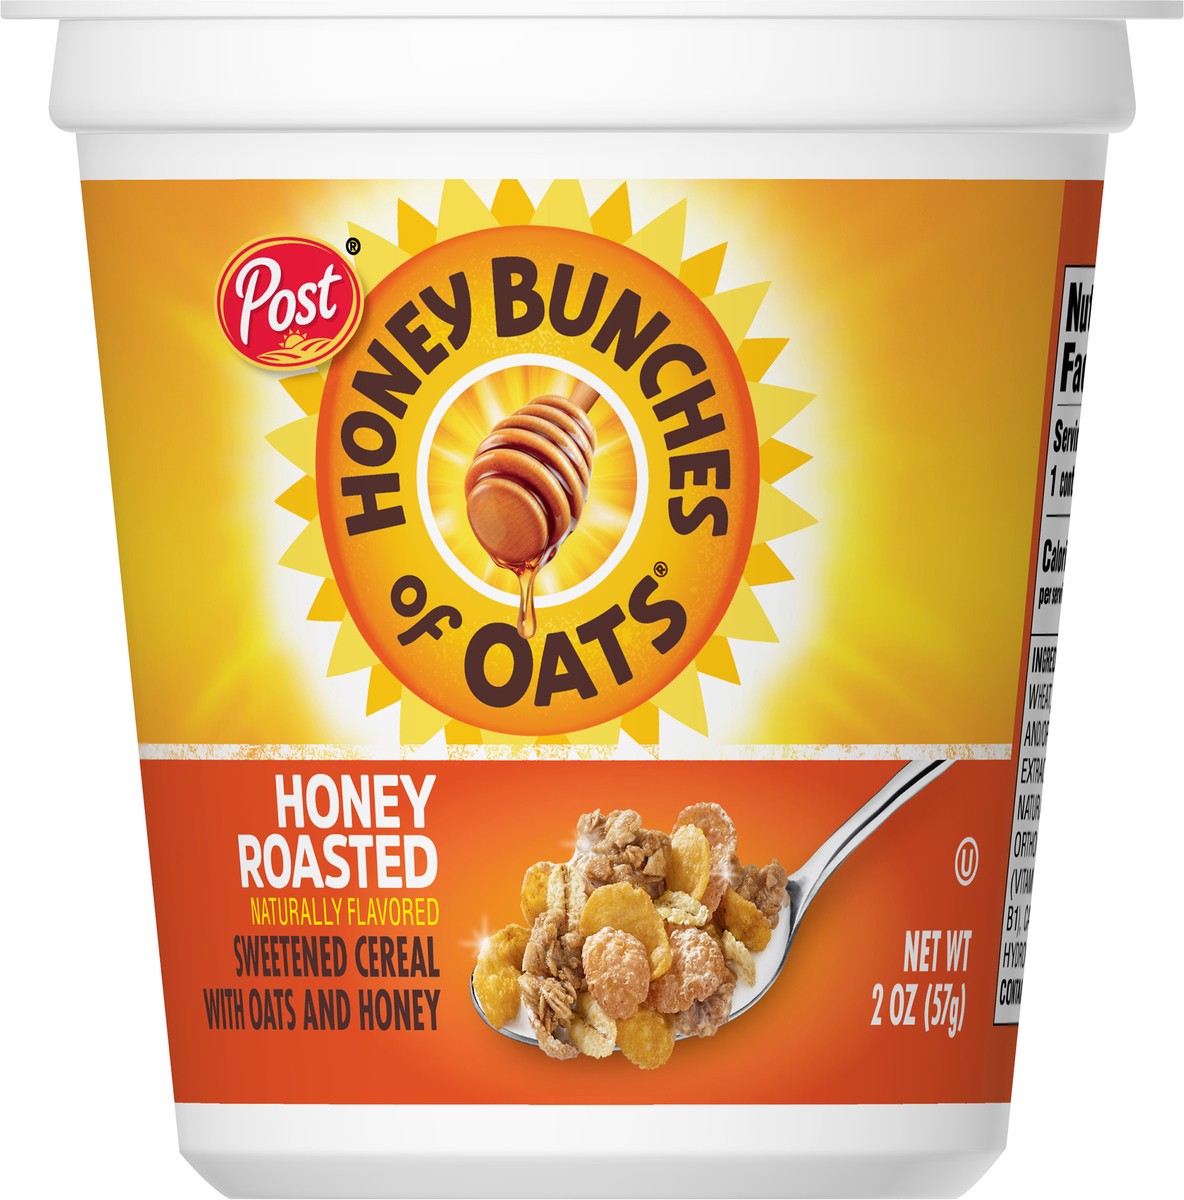 slide 4 of 11, Post Honey Bunches of Oats Honey Roasted Breakfast Cereal, 2 OZ Cereal Cup, 2 oz